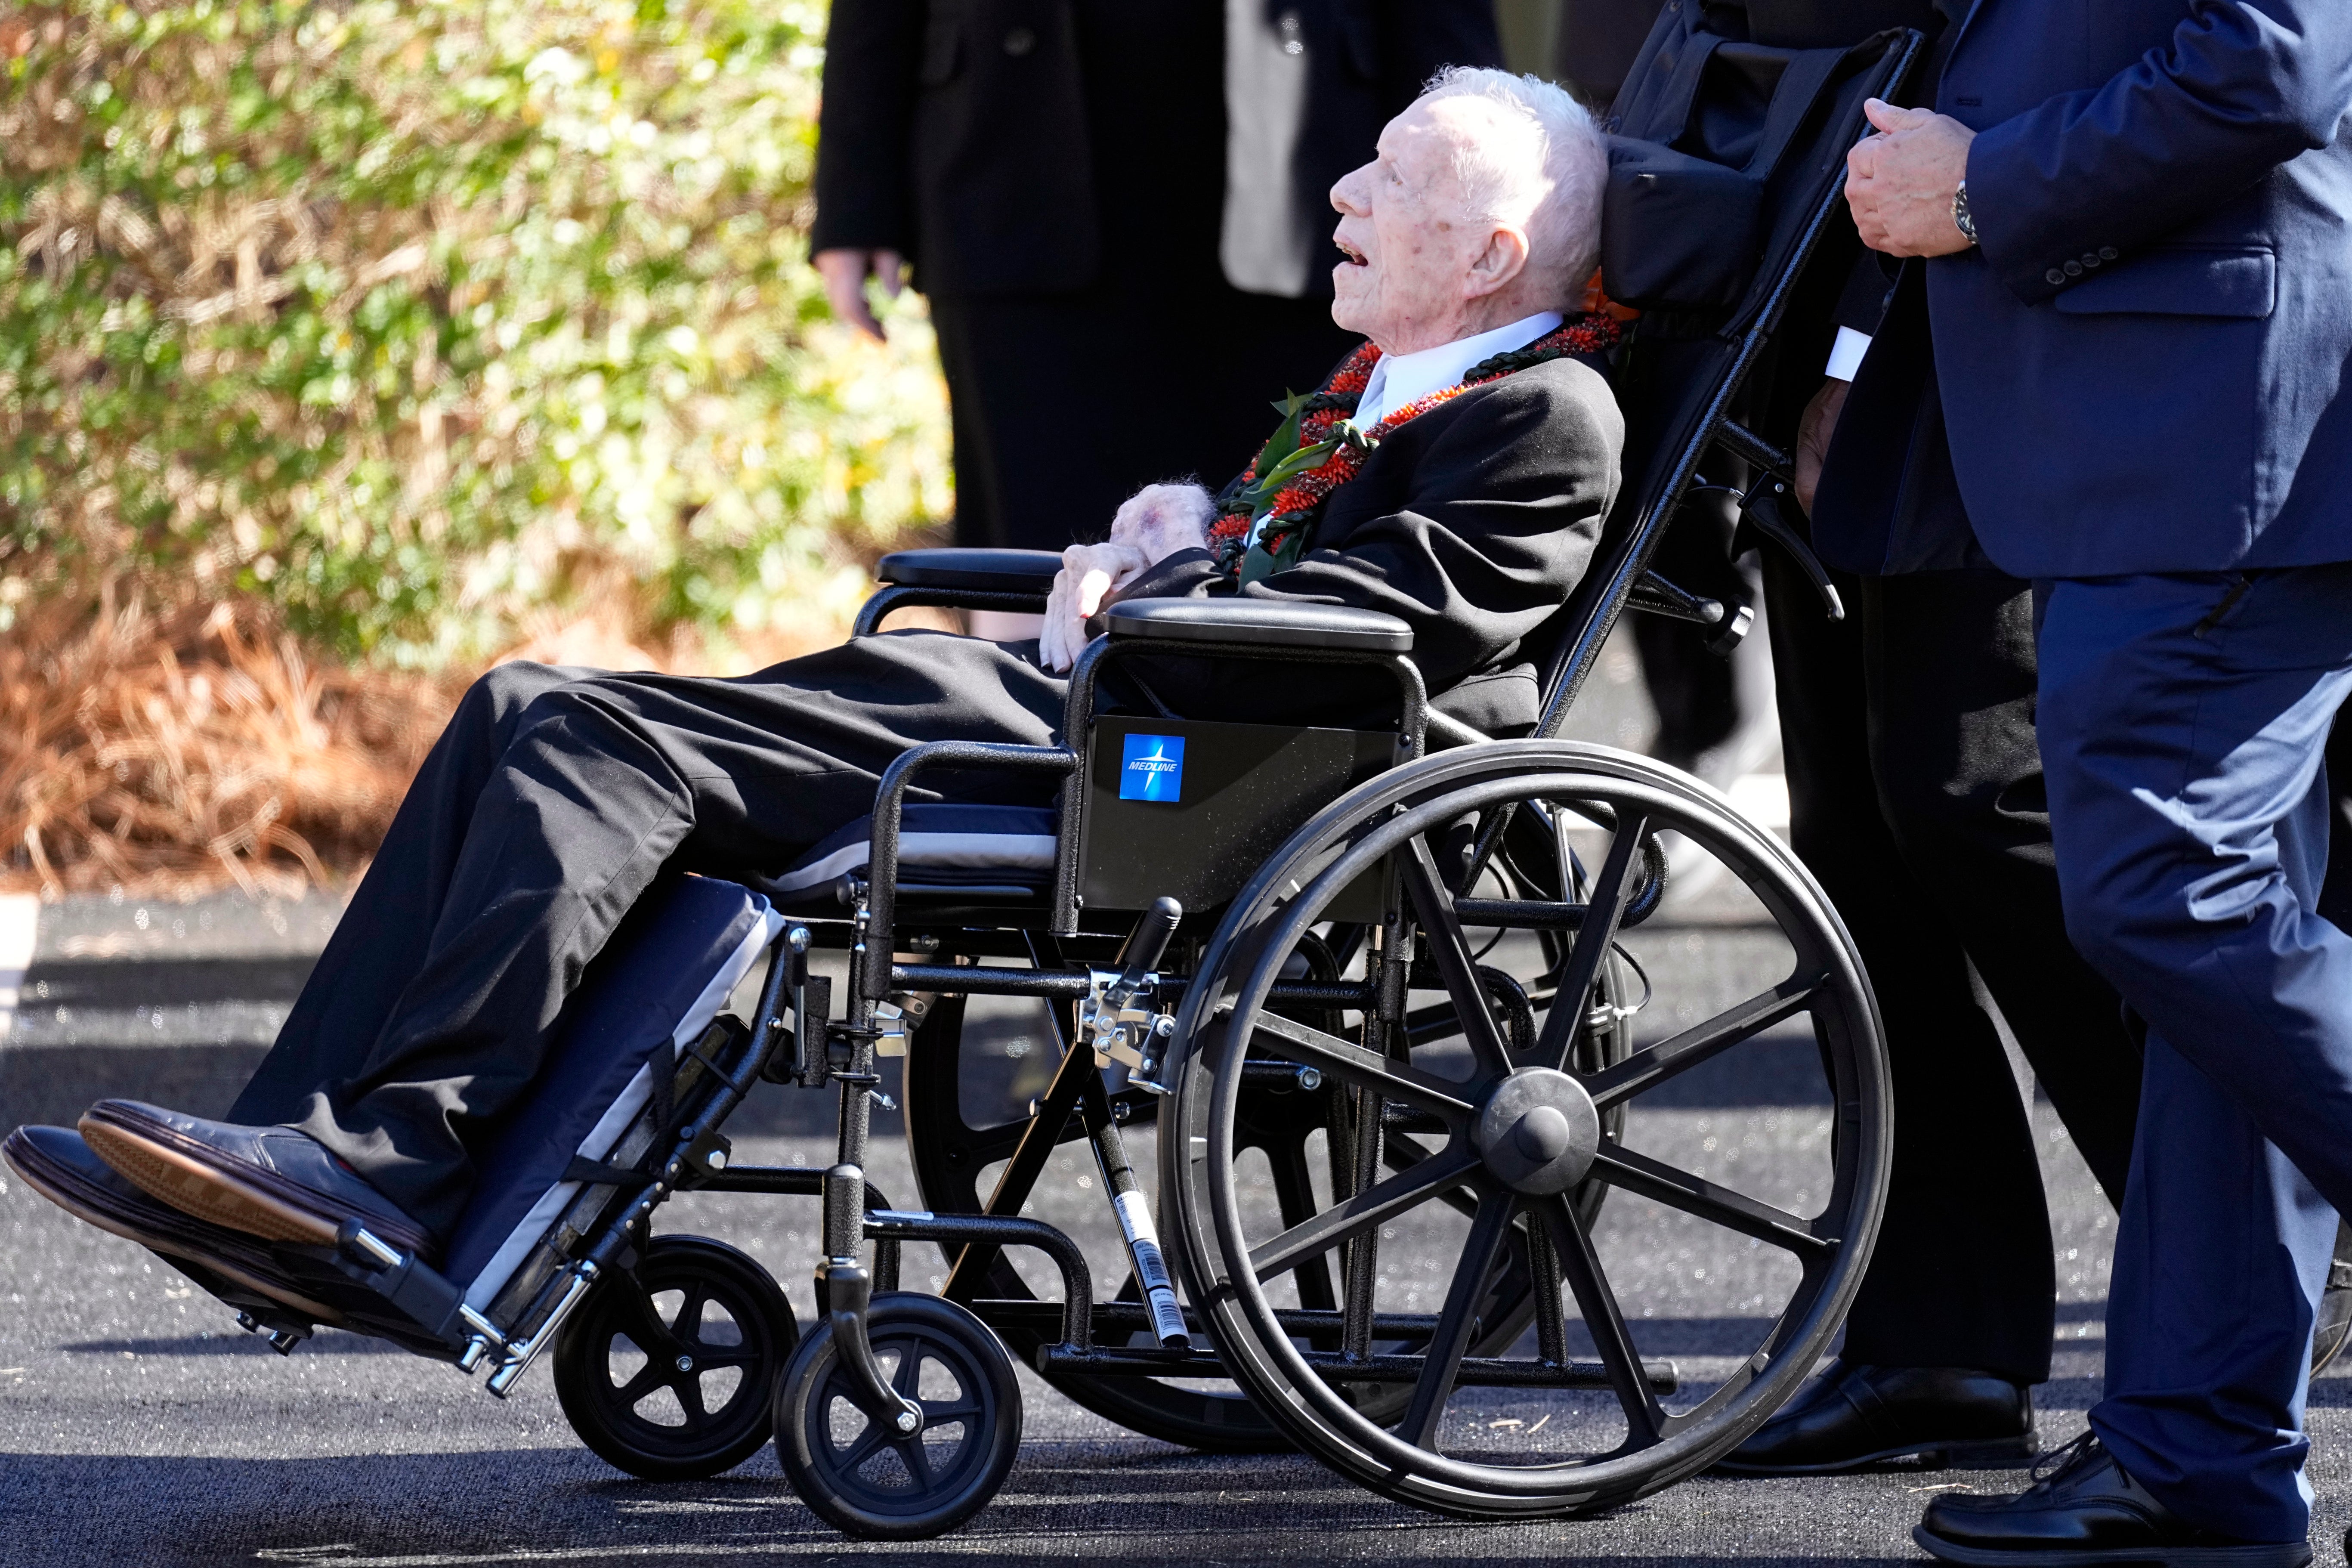 Former President Jimmy Carter departs after attending the funeral service for his wife, former first lady Rosalynn Carter, at Maranatha Baptist Church, in Plains, Georgia on 29 November 2023